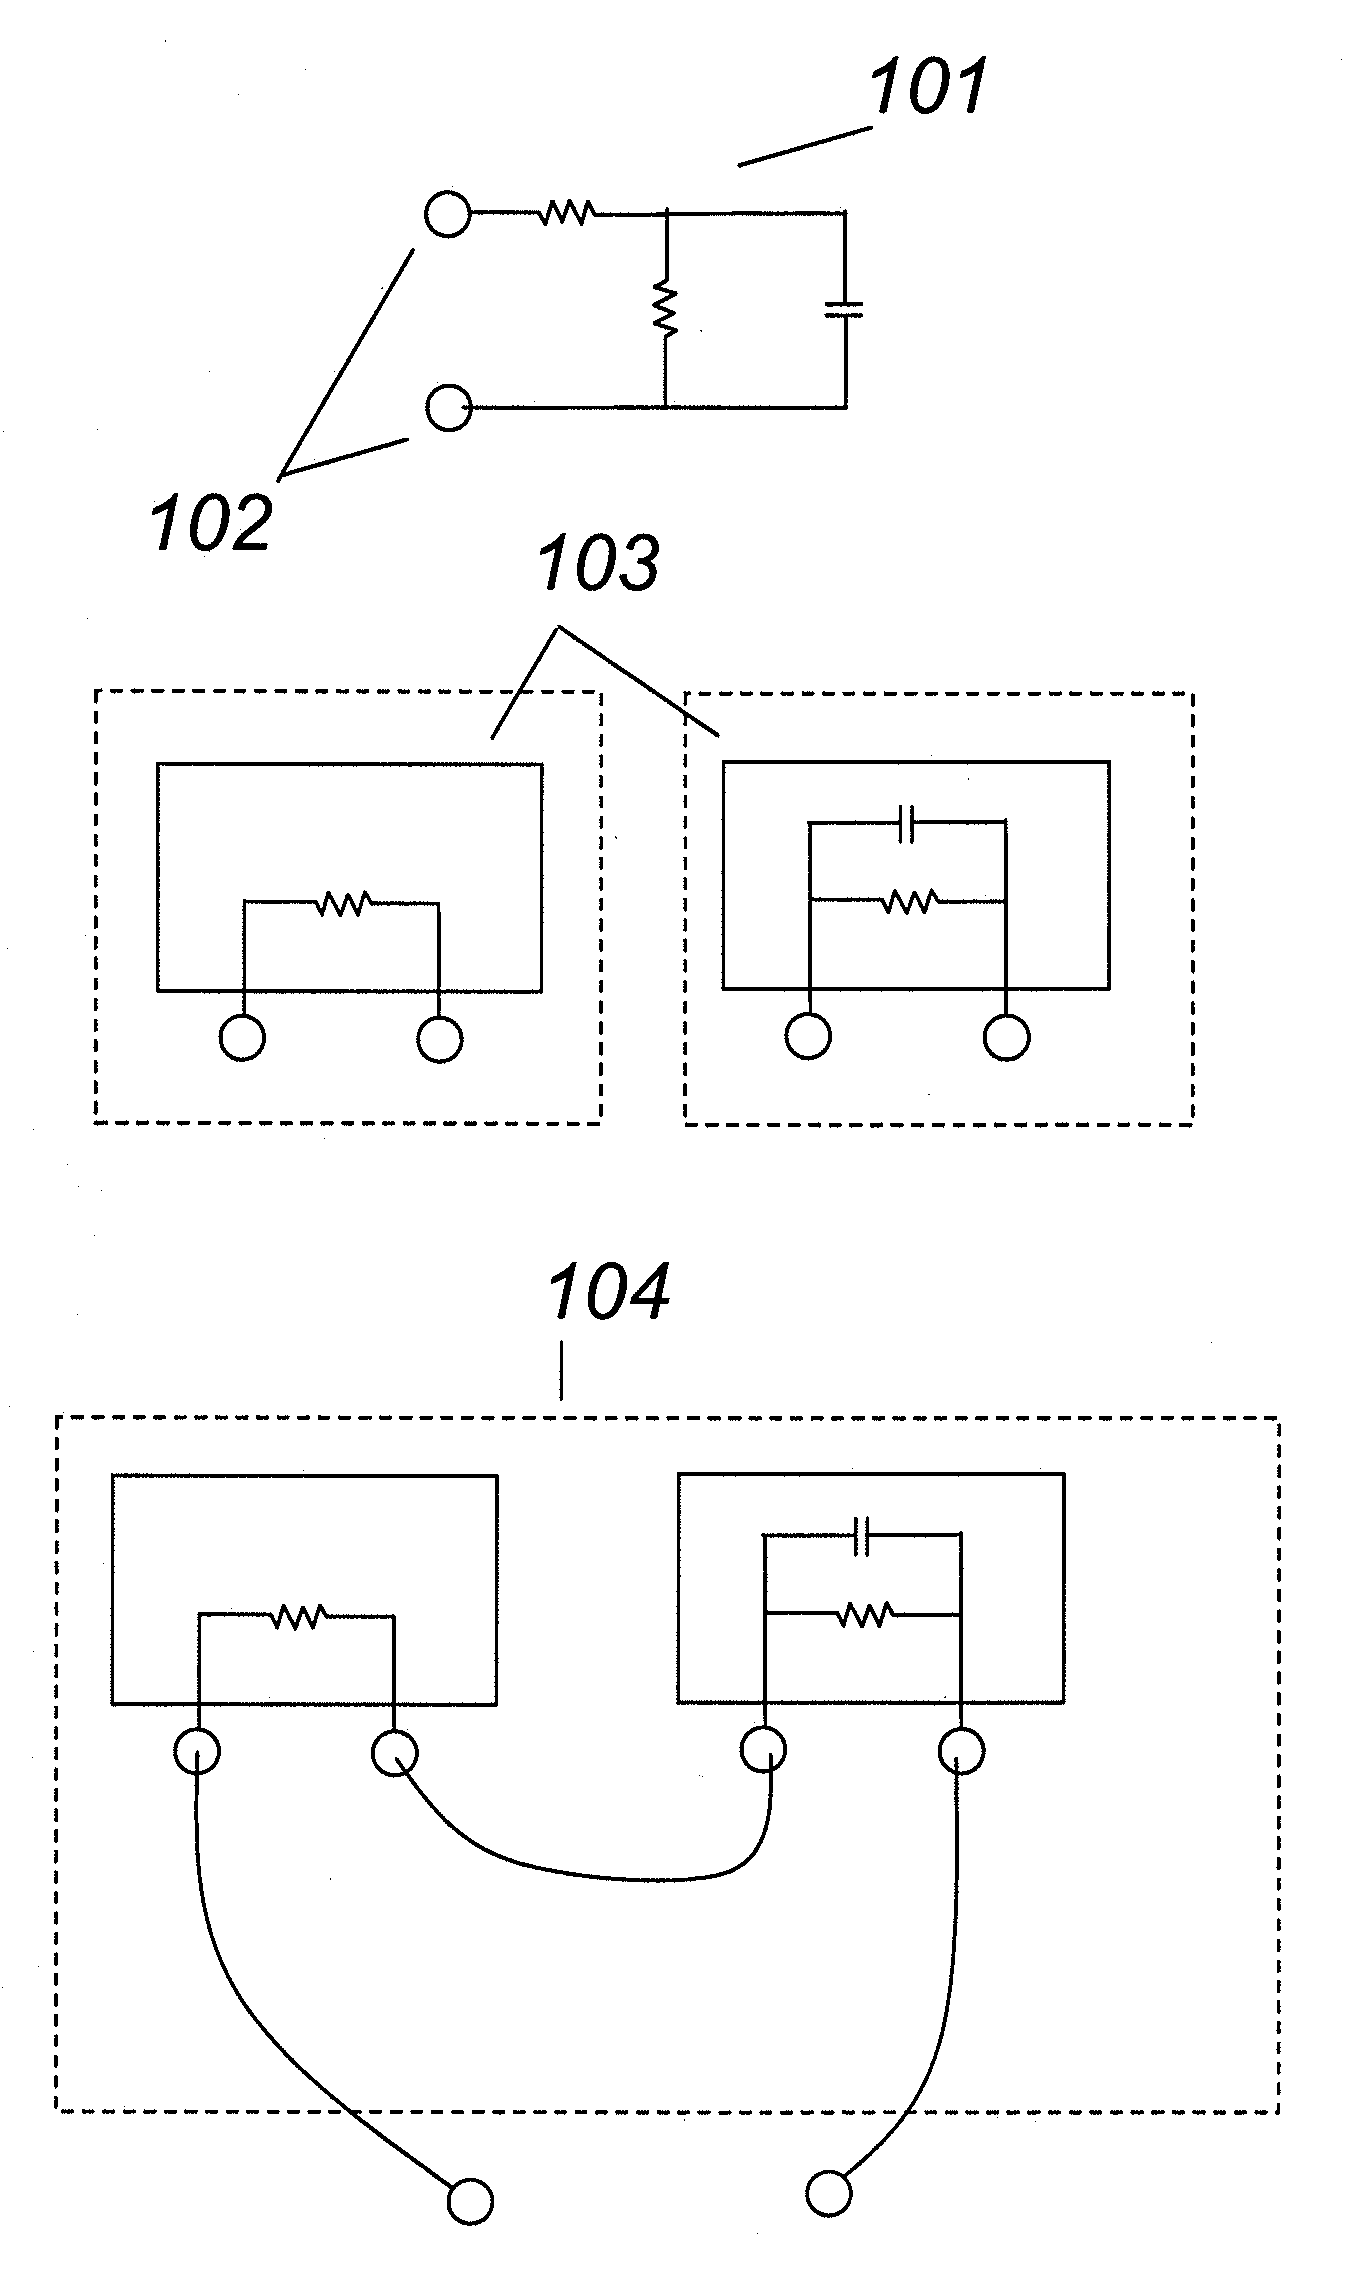 Modular prototyping of a circuit for manufacturing